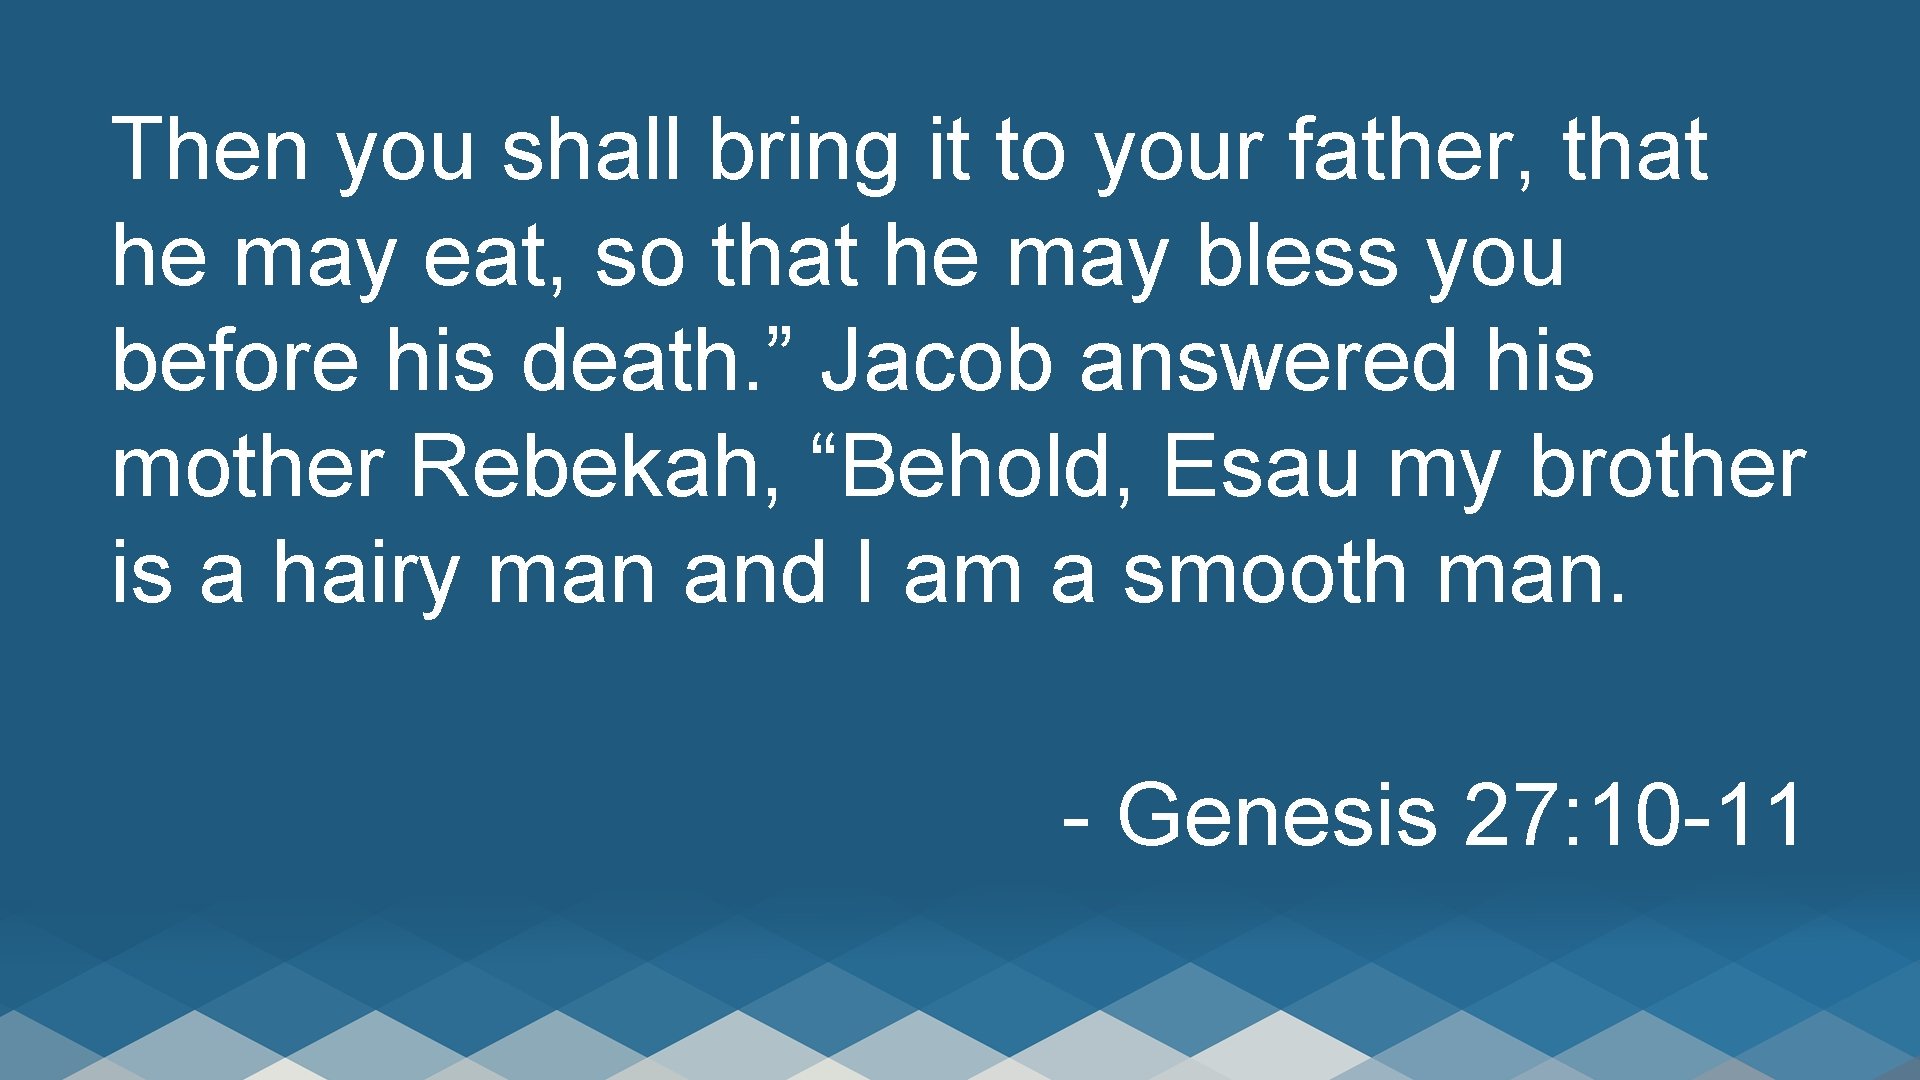 Then you shall bring it to your father, that he may eat, so that